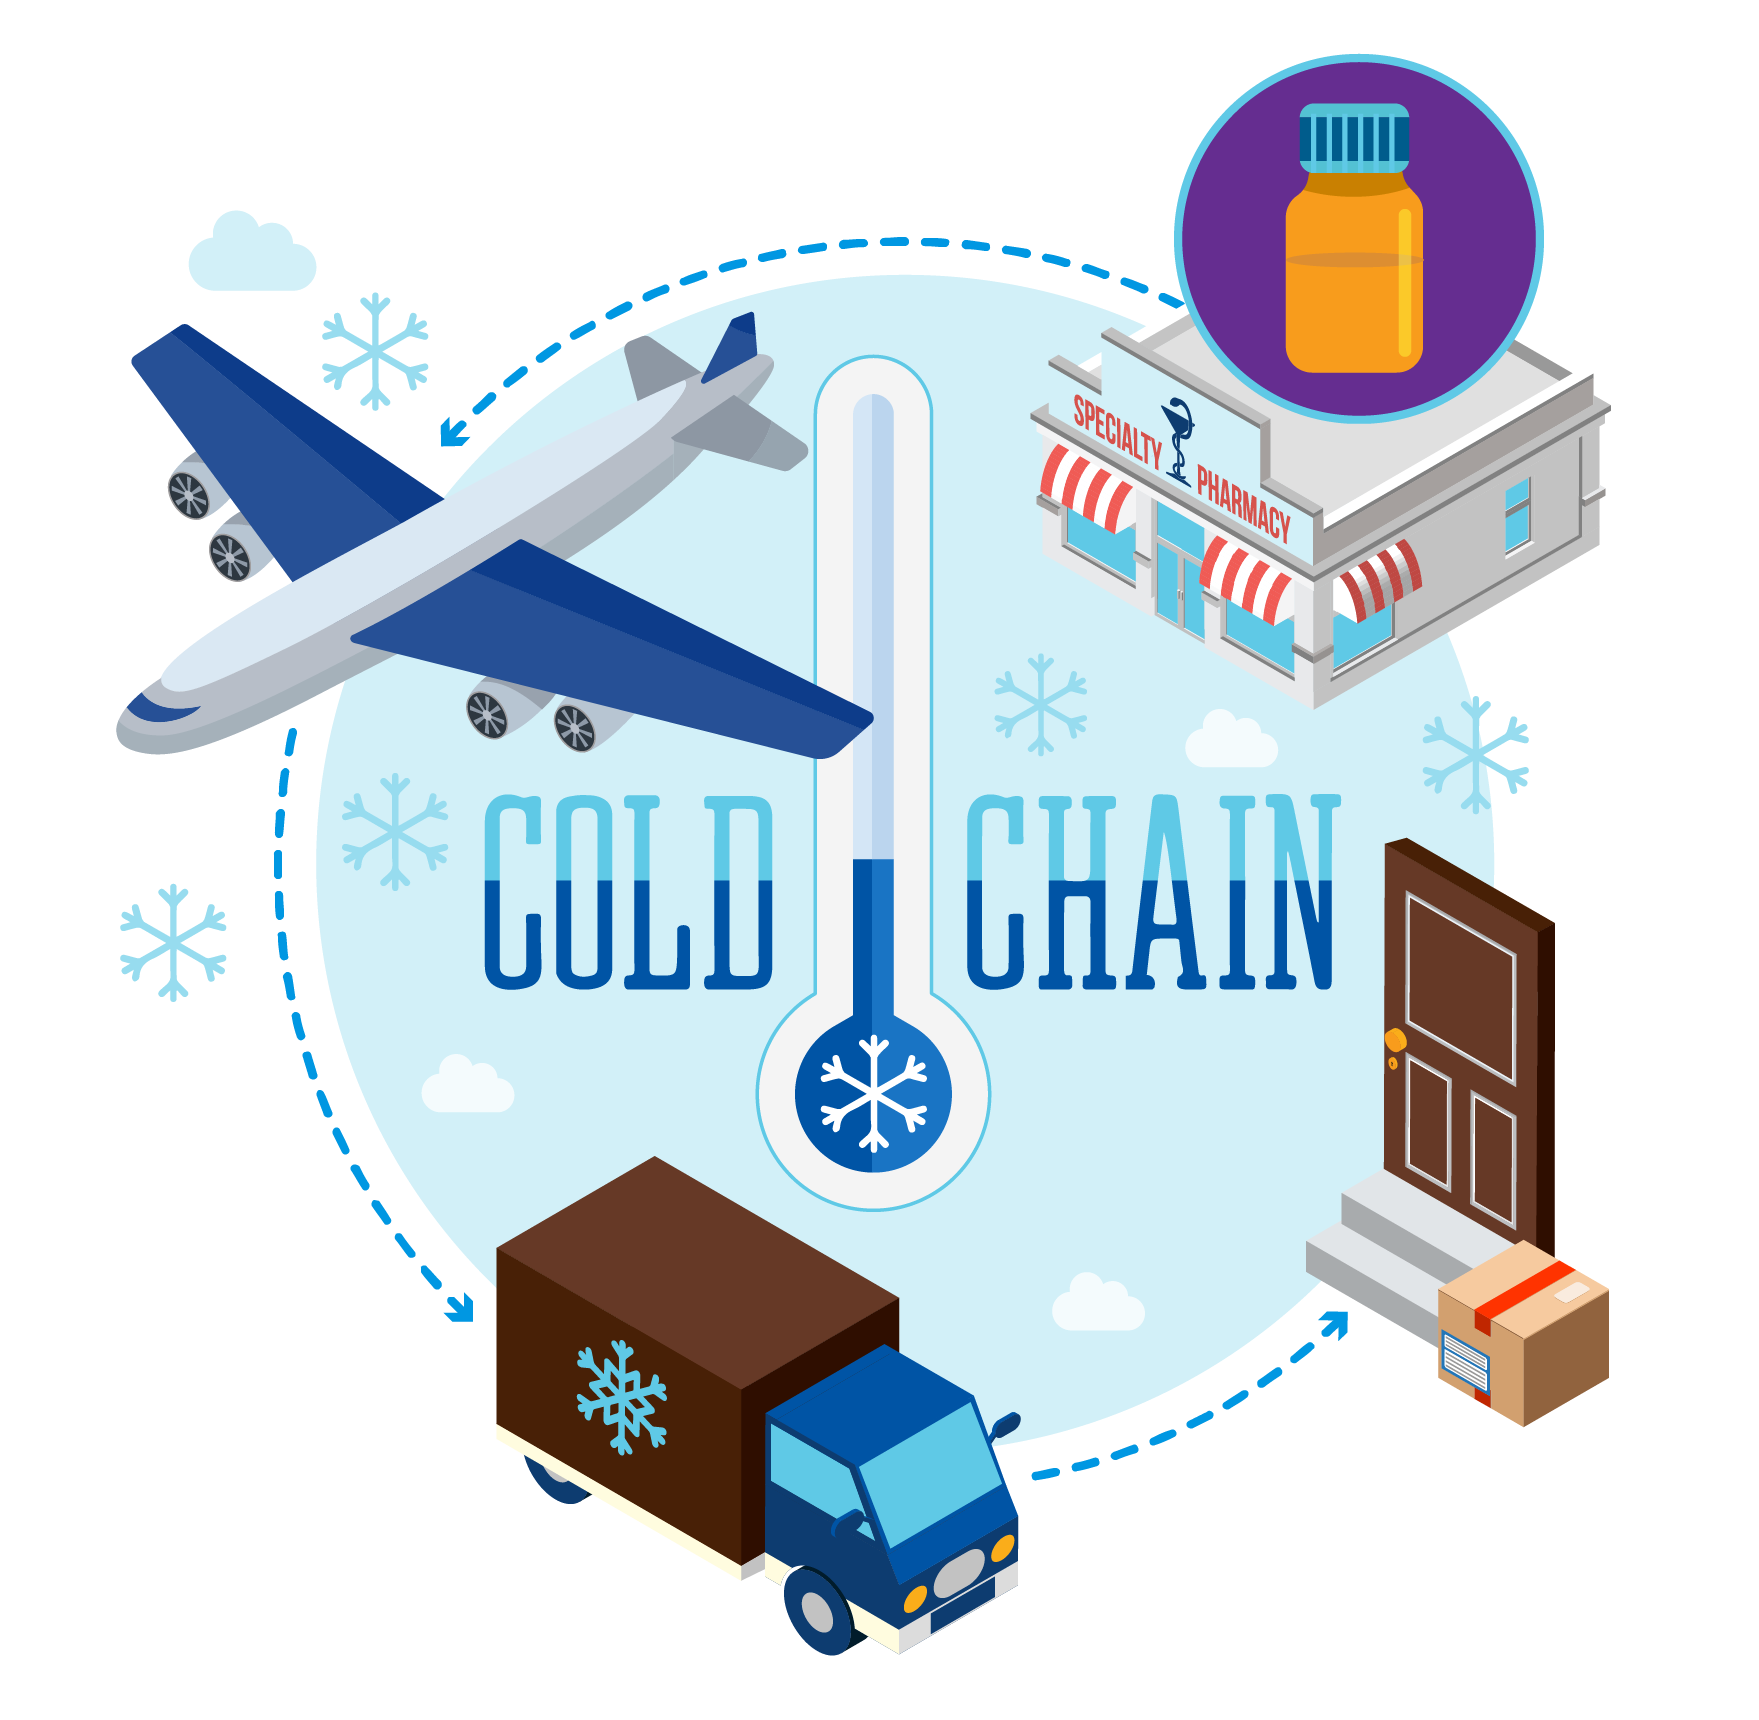 Illustration of Cold Chain Monitoring Solutions for industries pharma, food, logistics, fleets, tracking solutions, monitoring temperatures